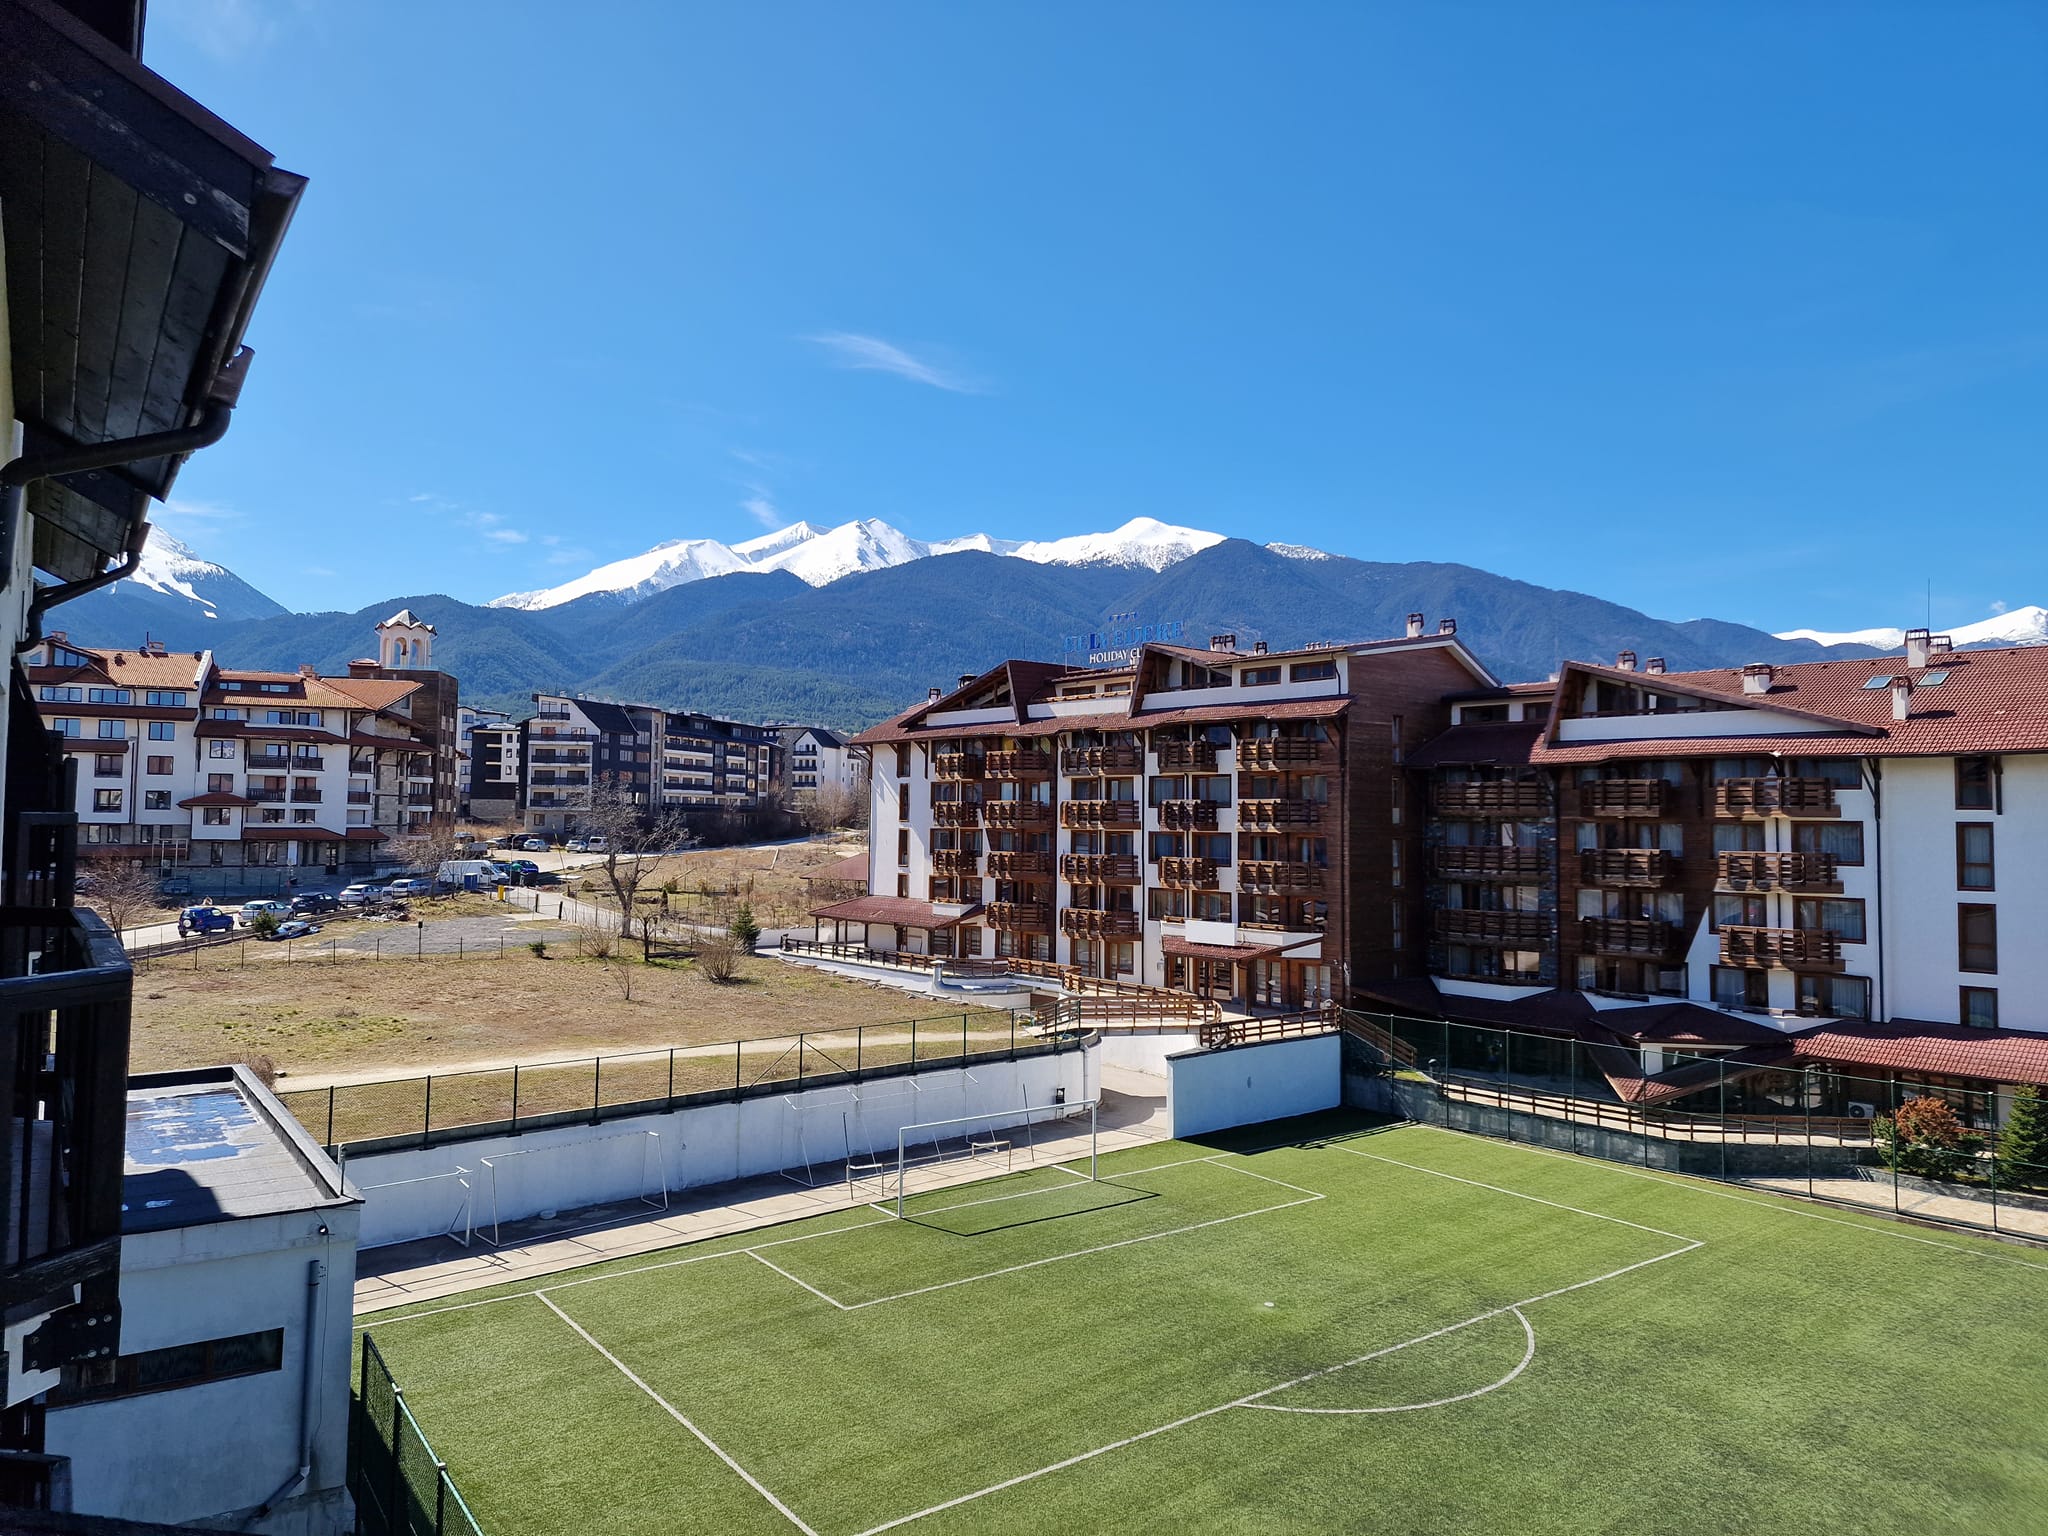 One-bedroom apartment in Bansko next to Hotel Belvedere, 200 meters from the ski lift